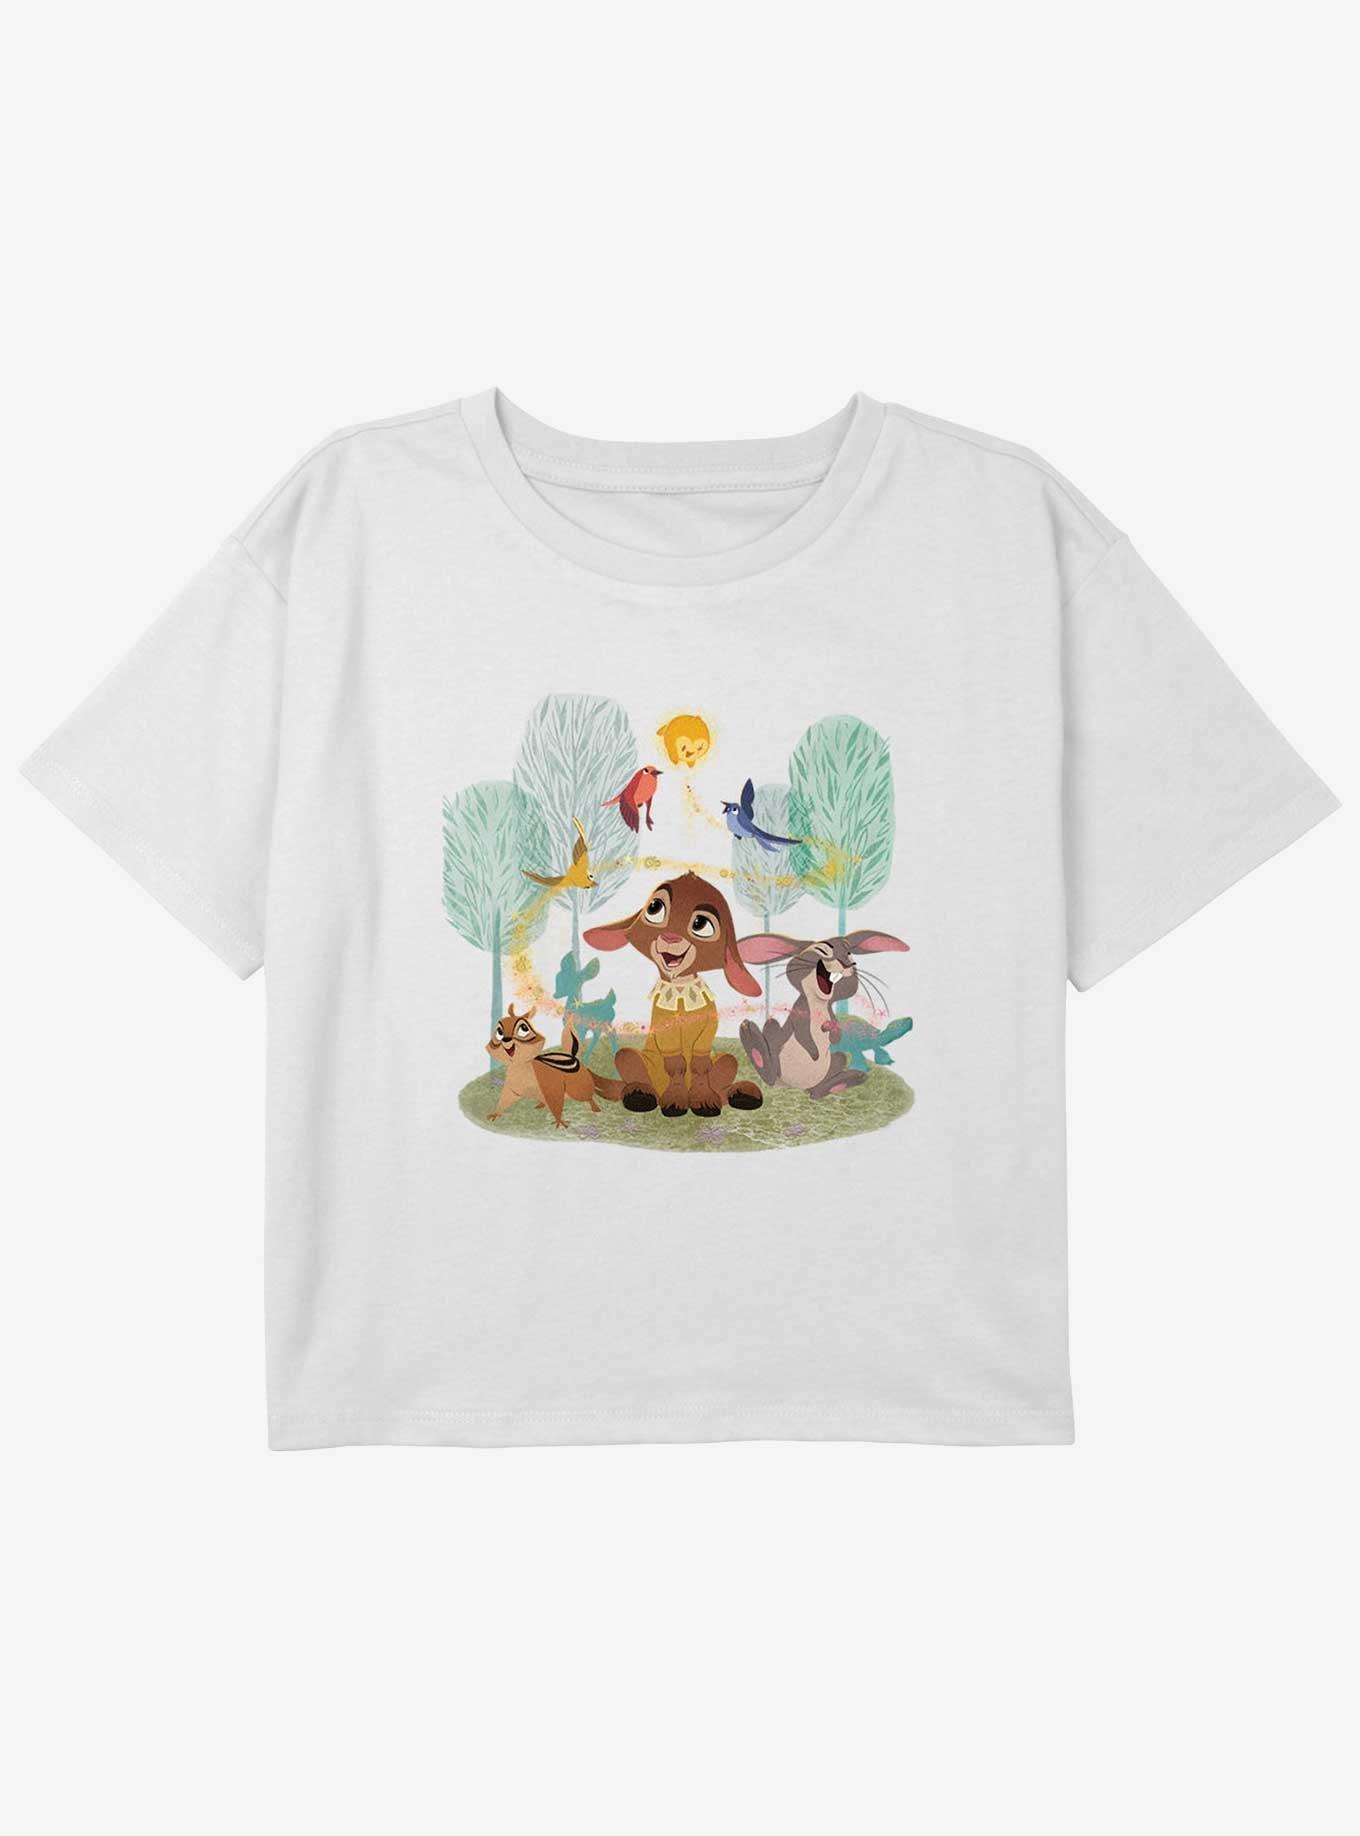 Disney Wish Star And Friends Girls Youth Crop T-Shirt, WHITE, hi-res